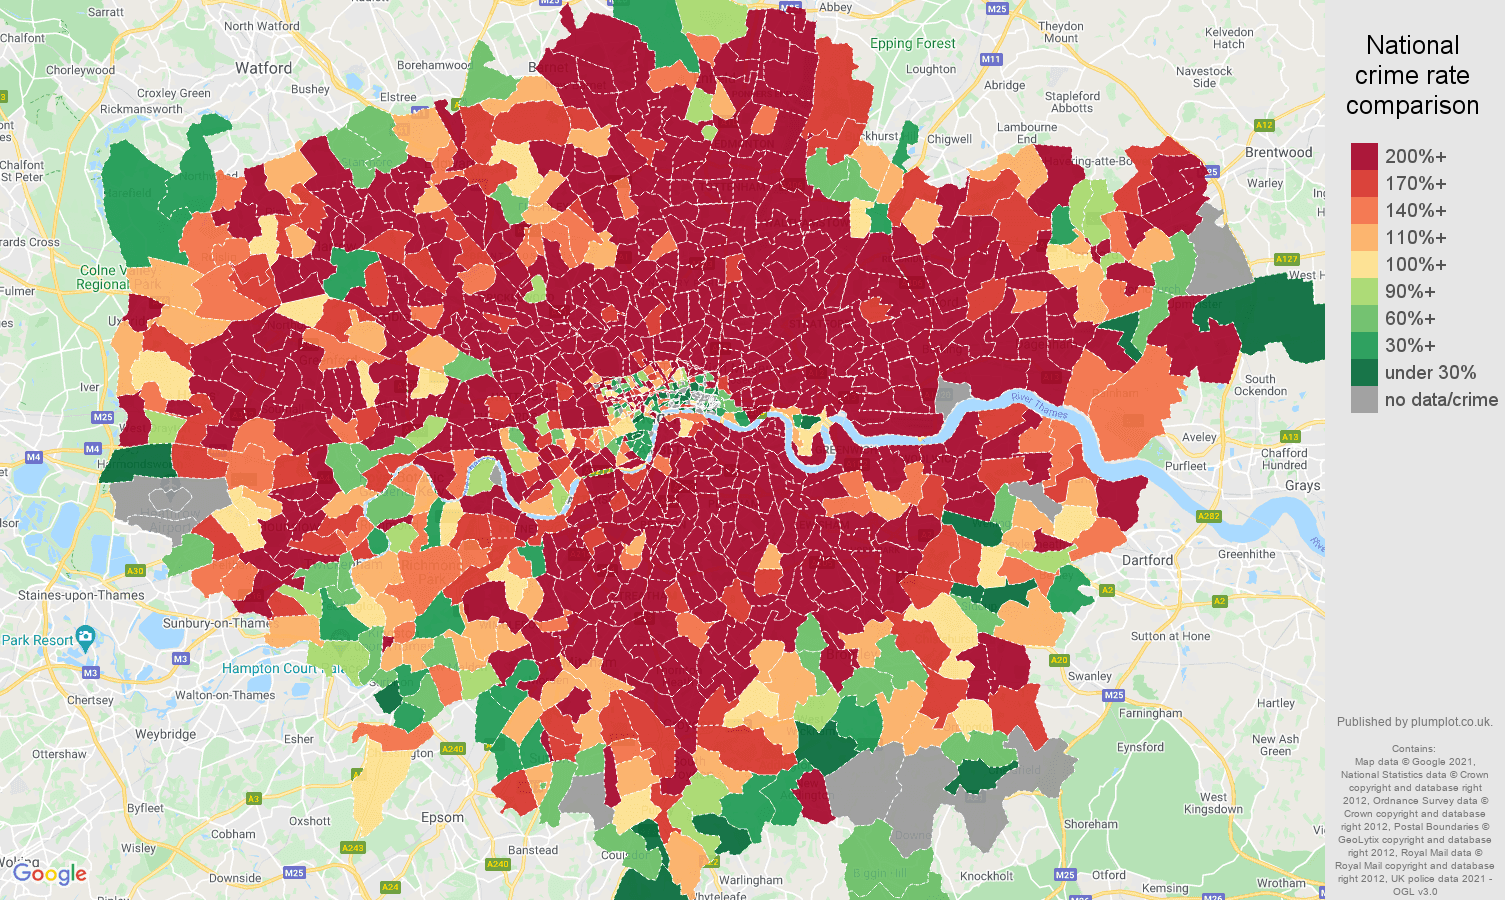 London robbery crime rate comparison map